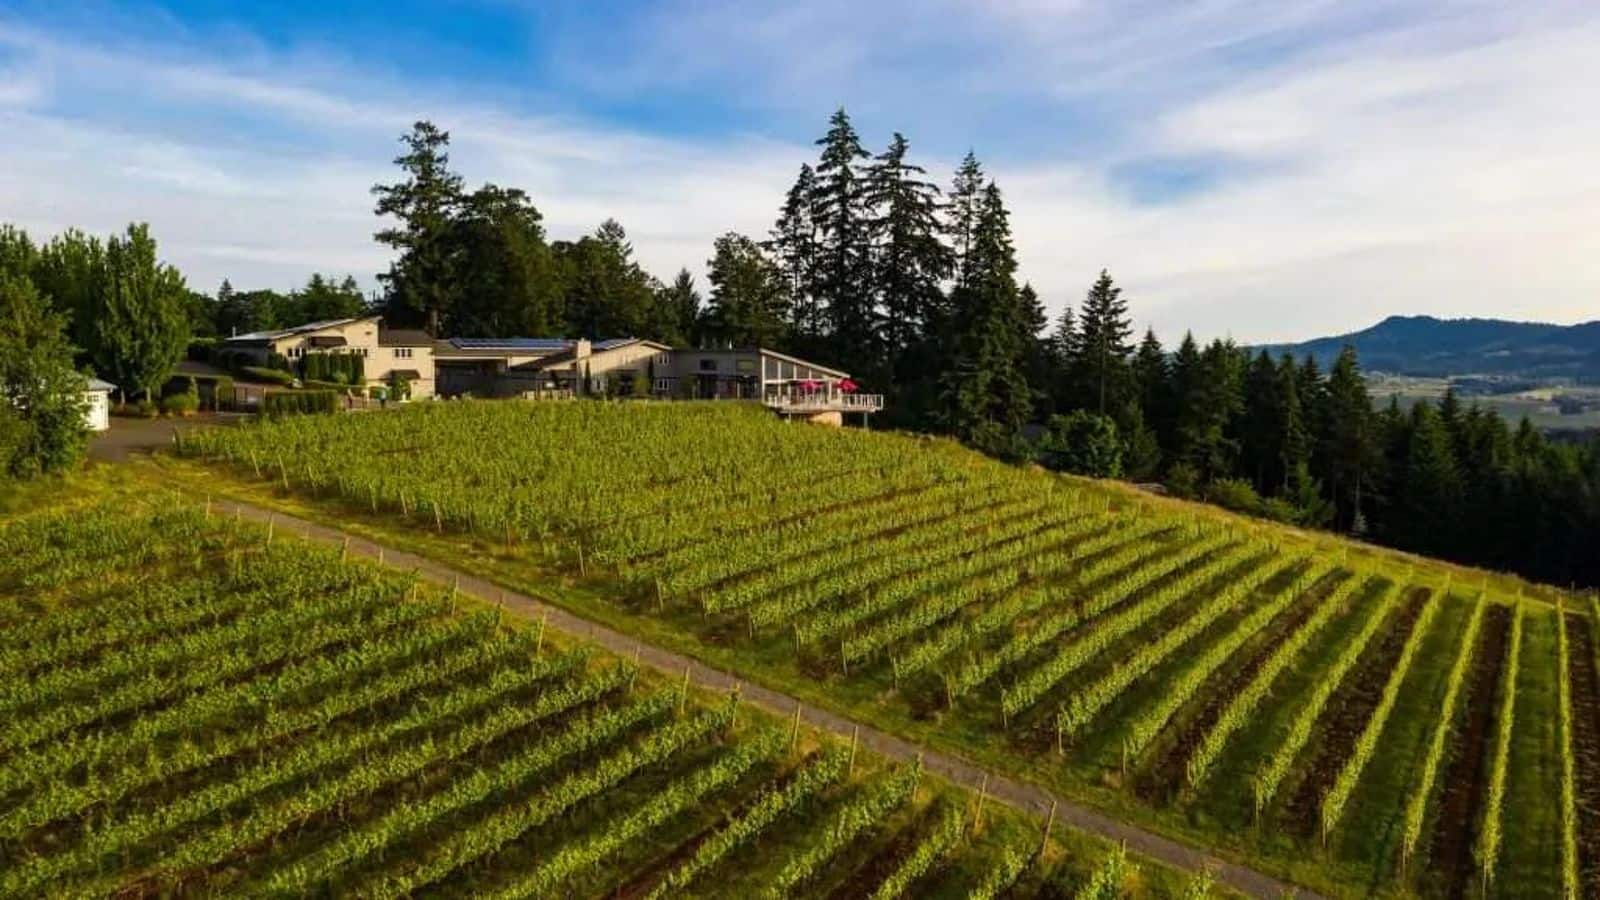 Discover Portland's vineyard gems with this travel guide